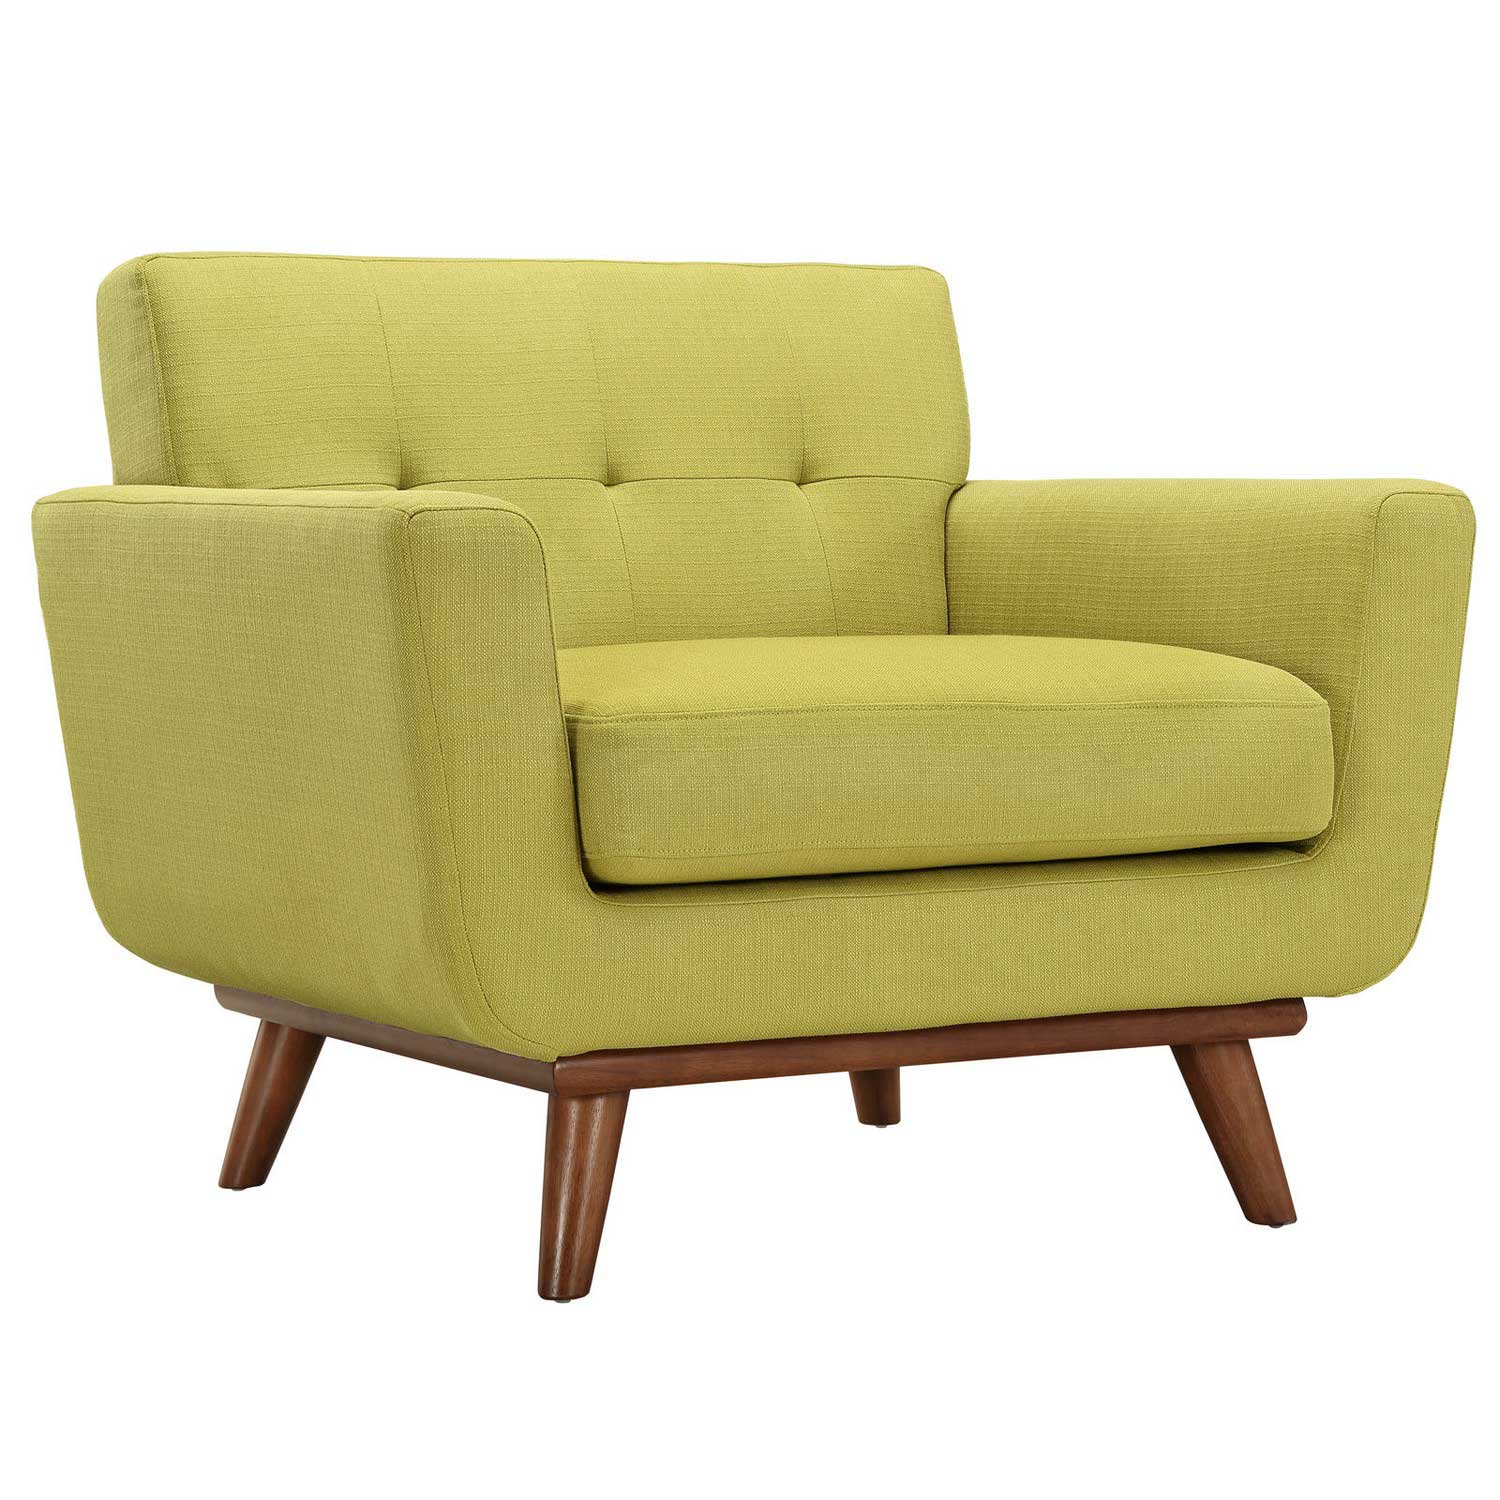 Modway Engage Armchair and Loveseat Set of 2 - Wheat